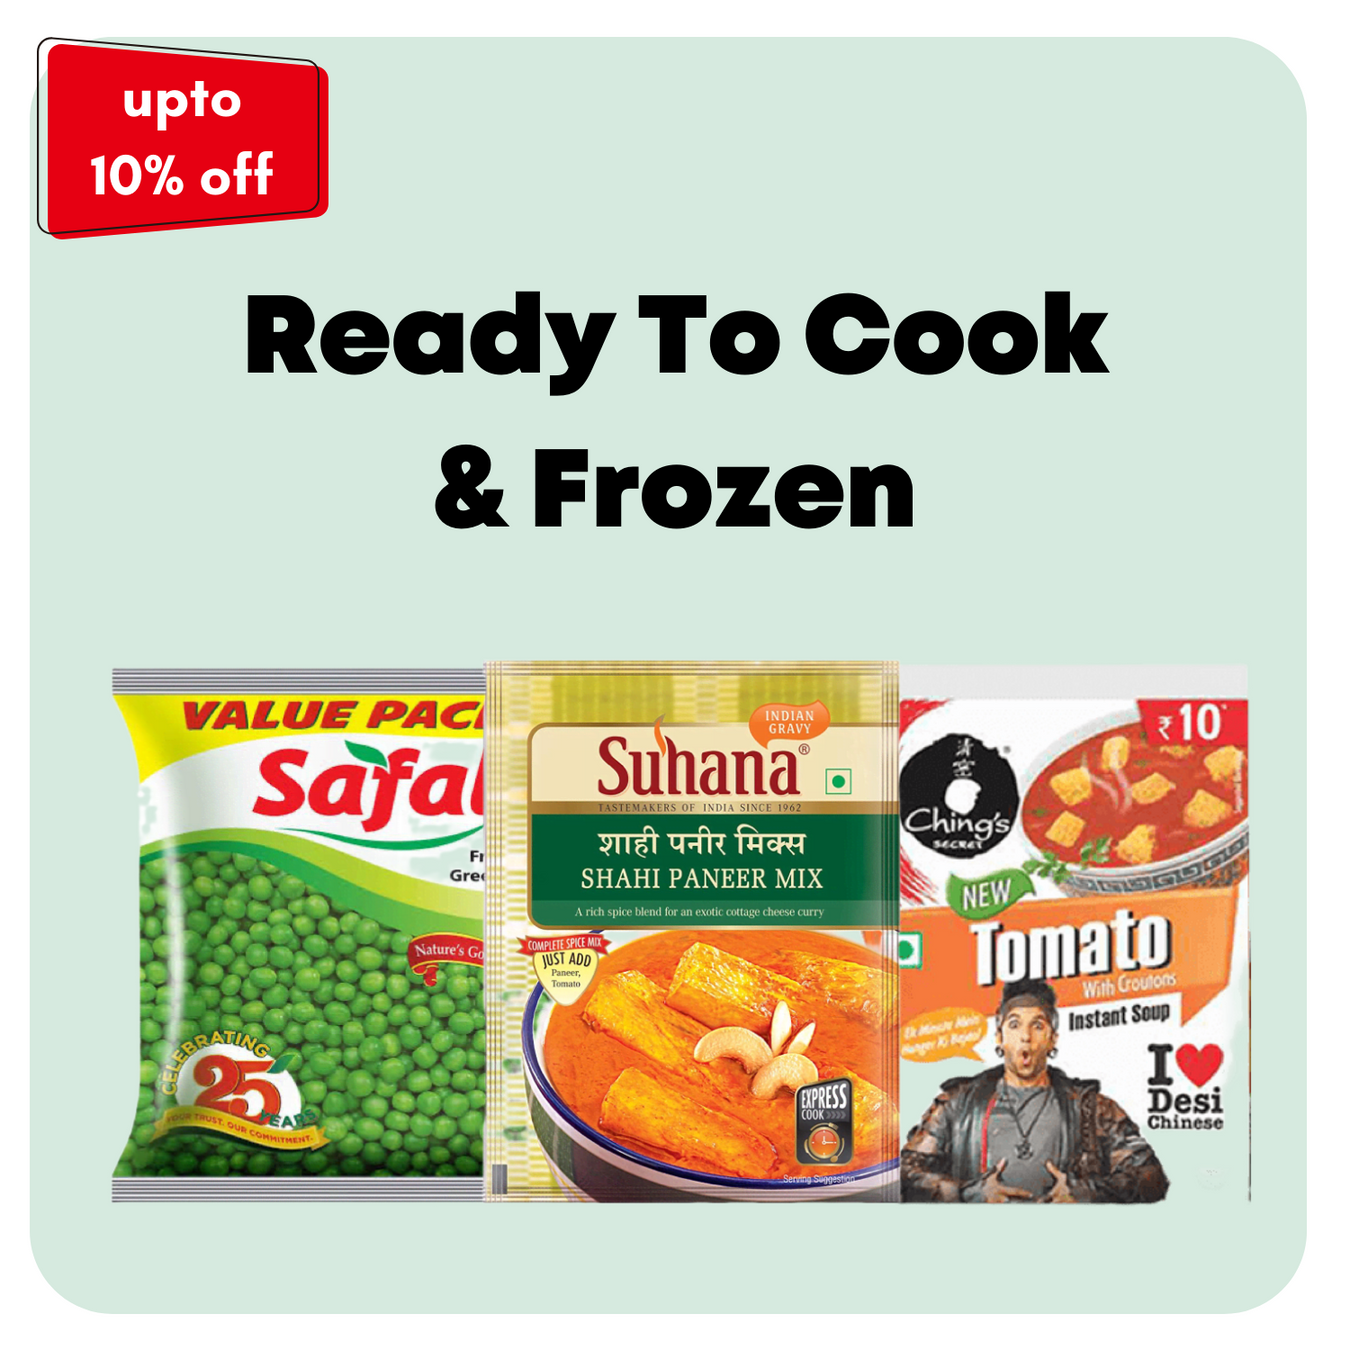 Frozen & Ready To Cook